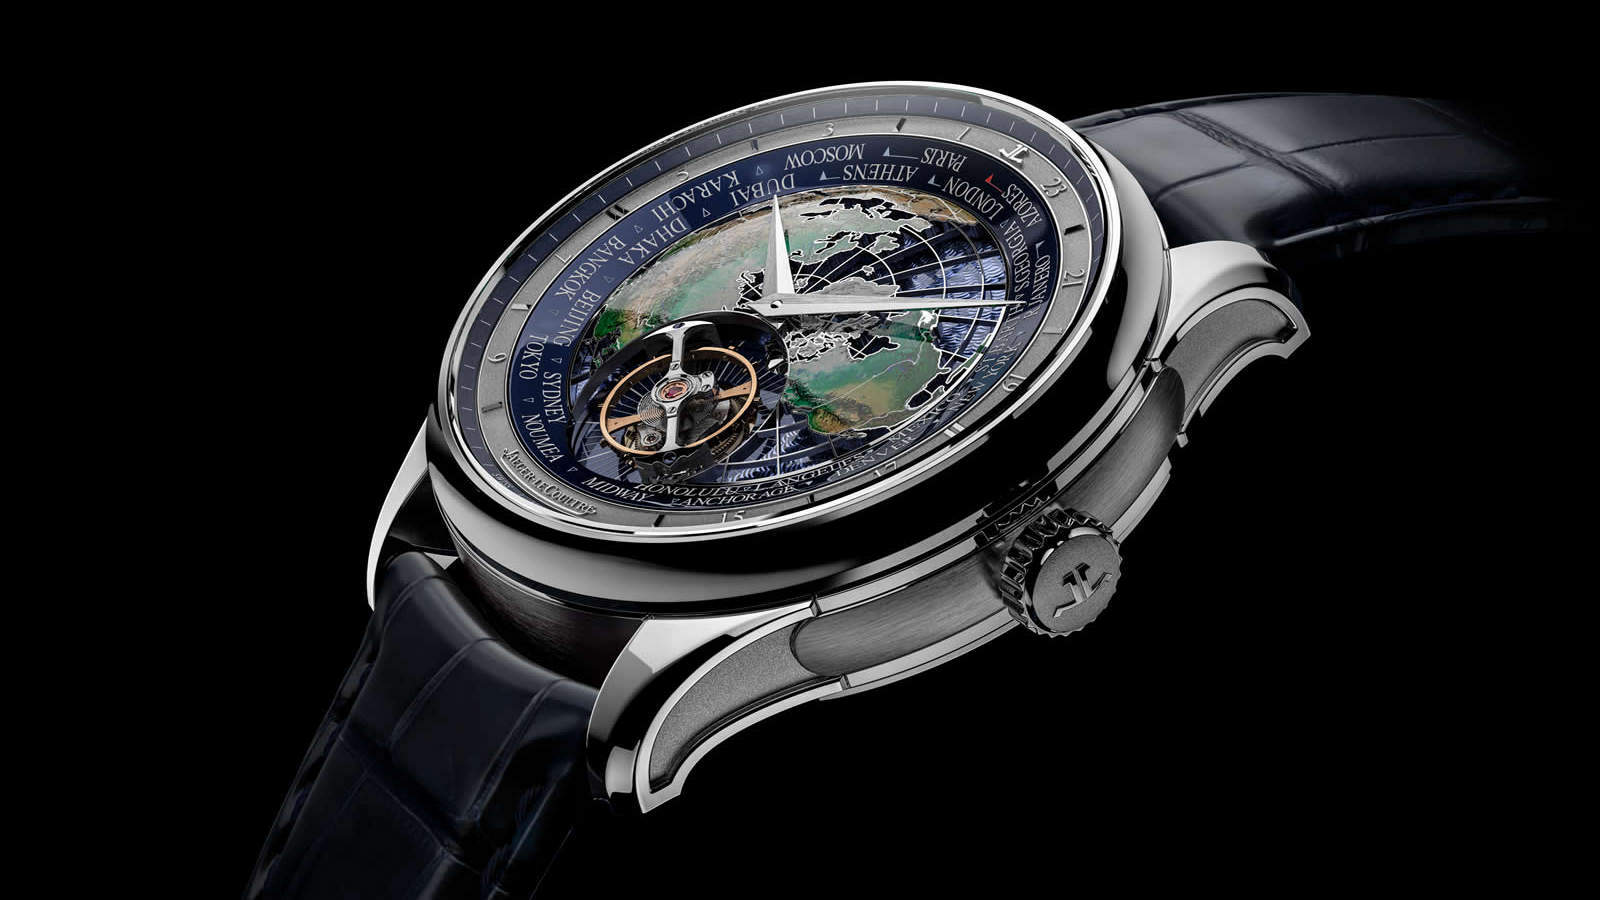 Jaeger-LeCoultre strikes the perfect balance between art and horology with the new Master Grande Tradition Caliber 948 timepiece